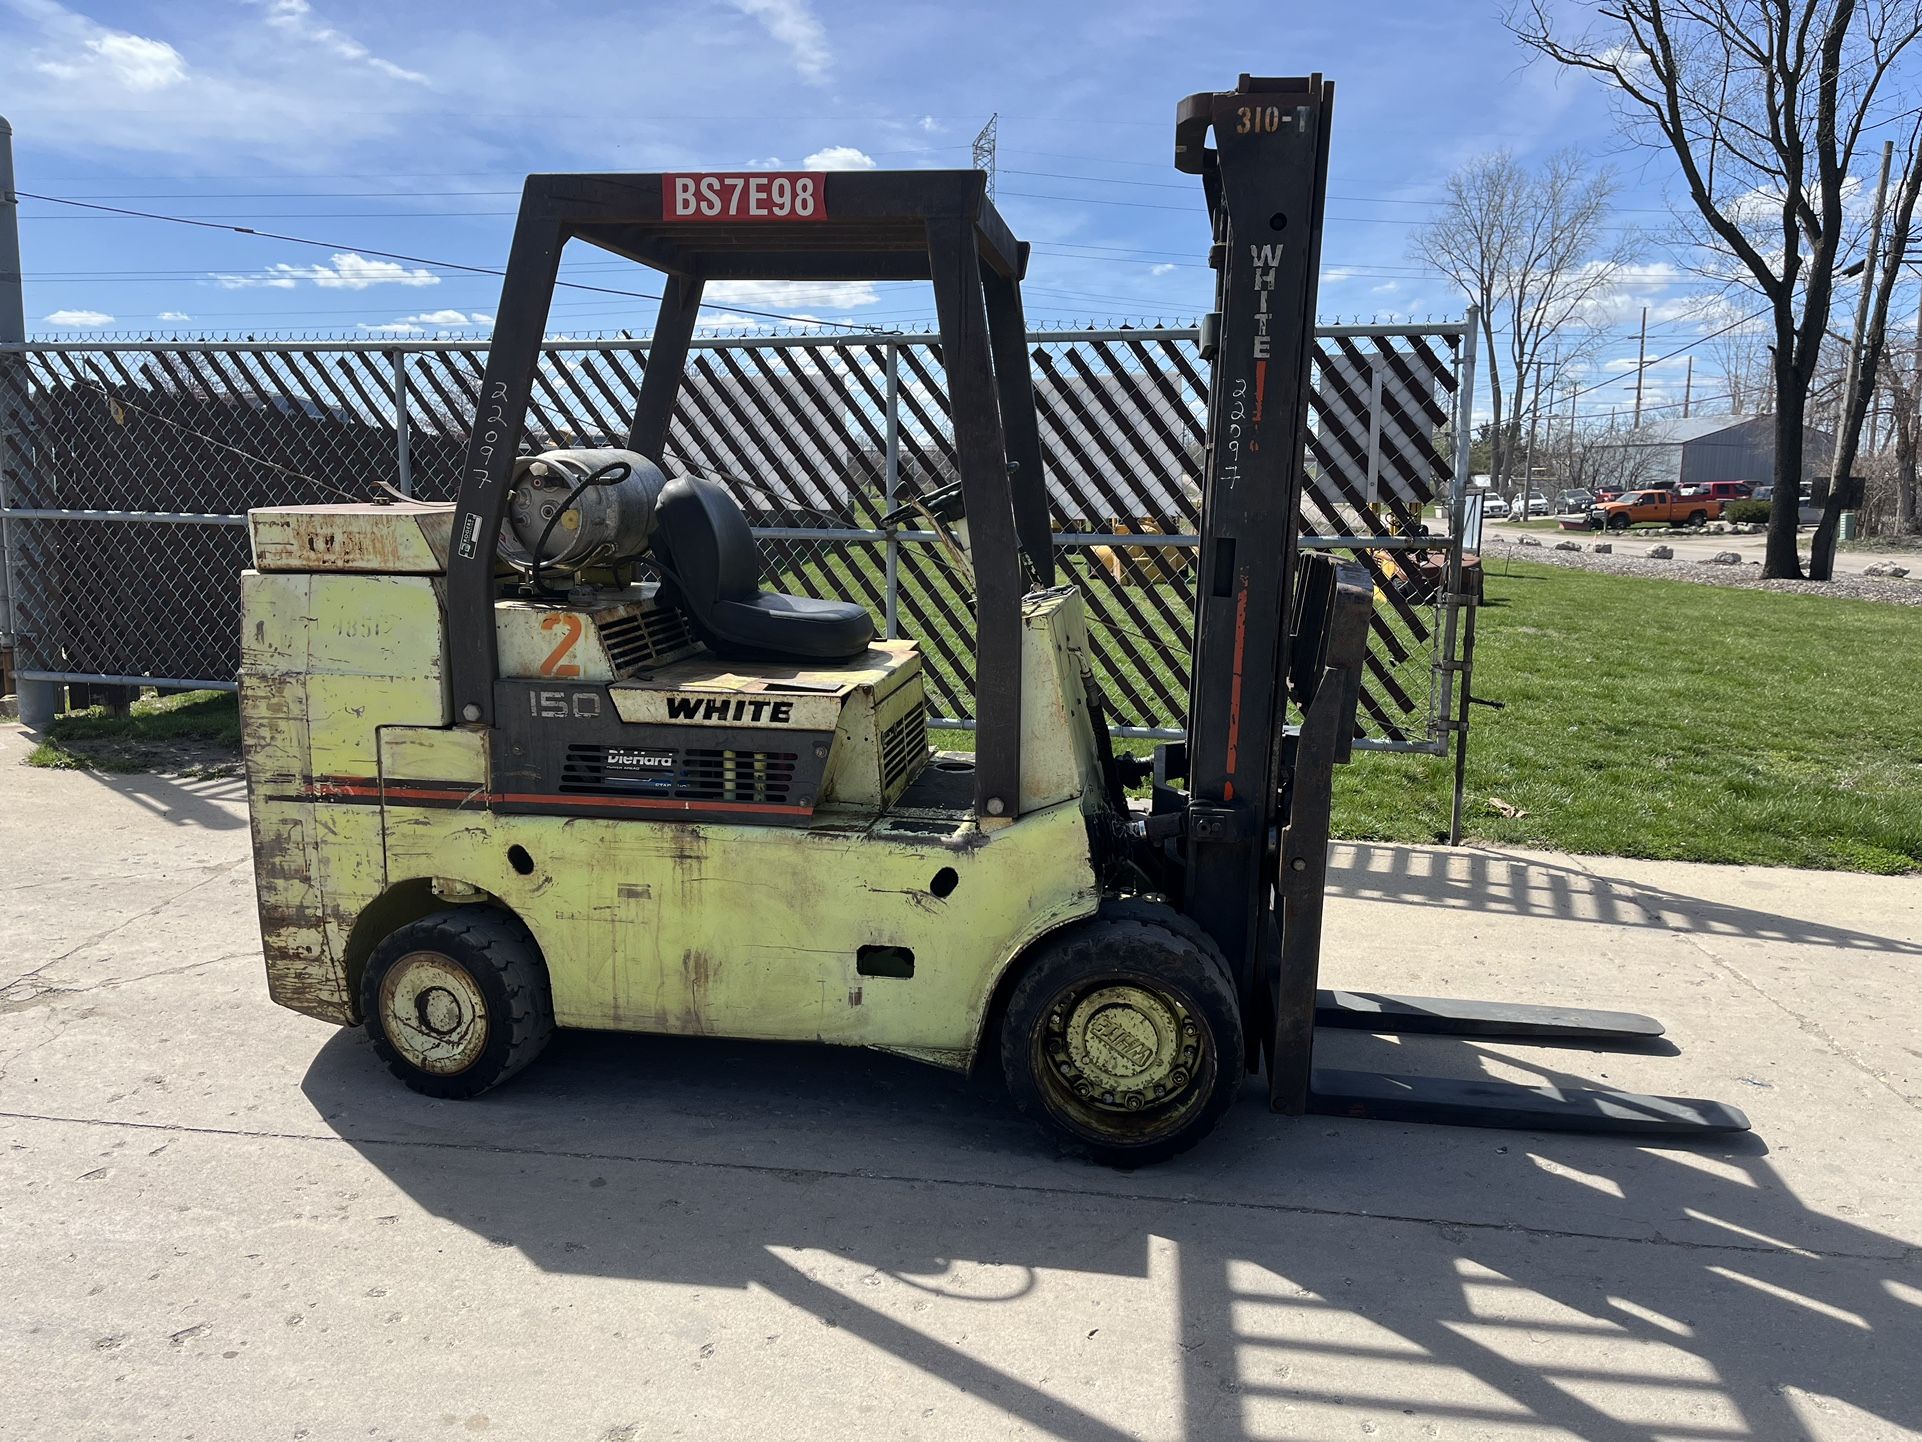 FOR SALE A WHITE MA150 FORKLIFT.94/ 114 MAST,AUTO TRANS,P/S. 15,000LB LIFT CAPACITY.